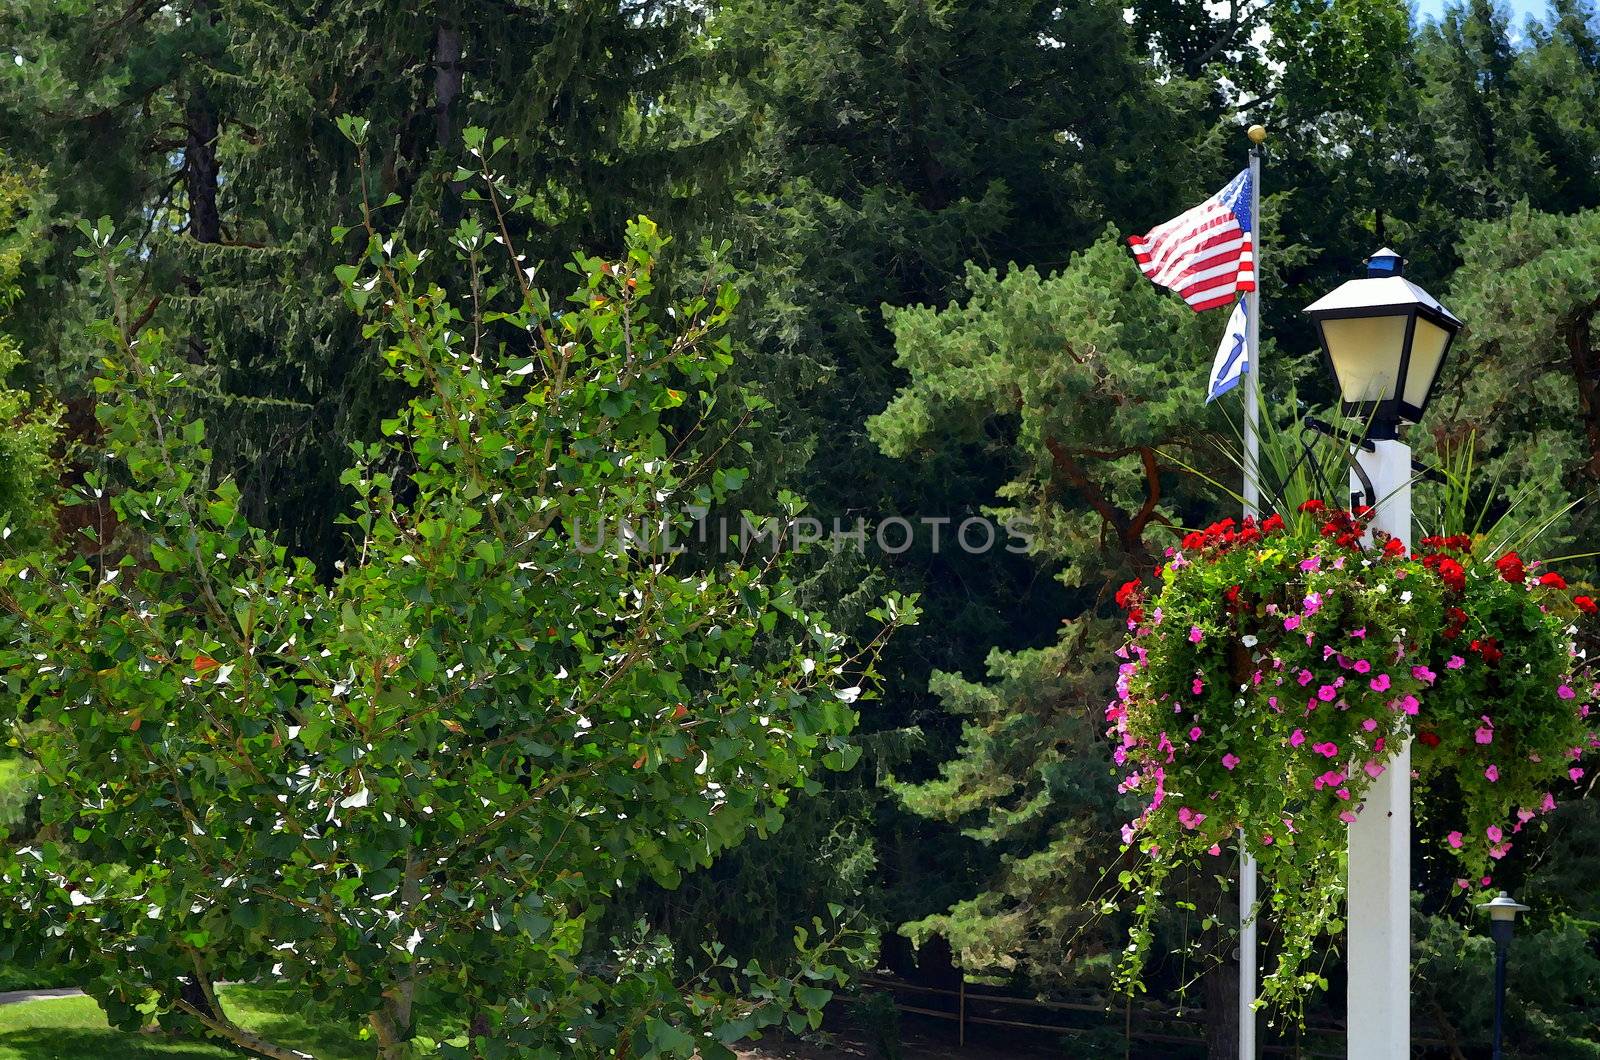 flag on pole along side hanging basket on pole among trees in the summer in watercolor art effect